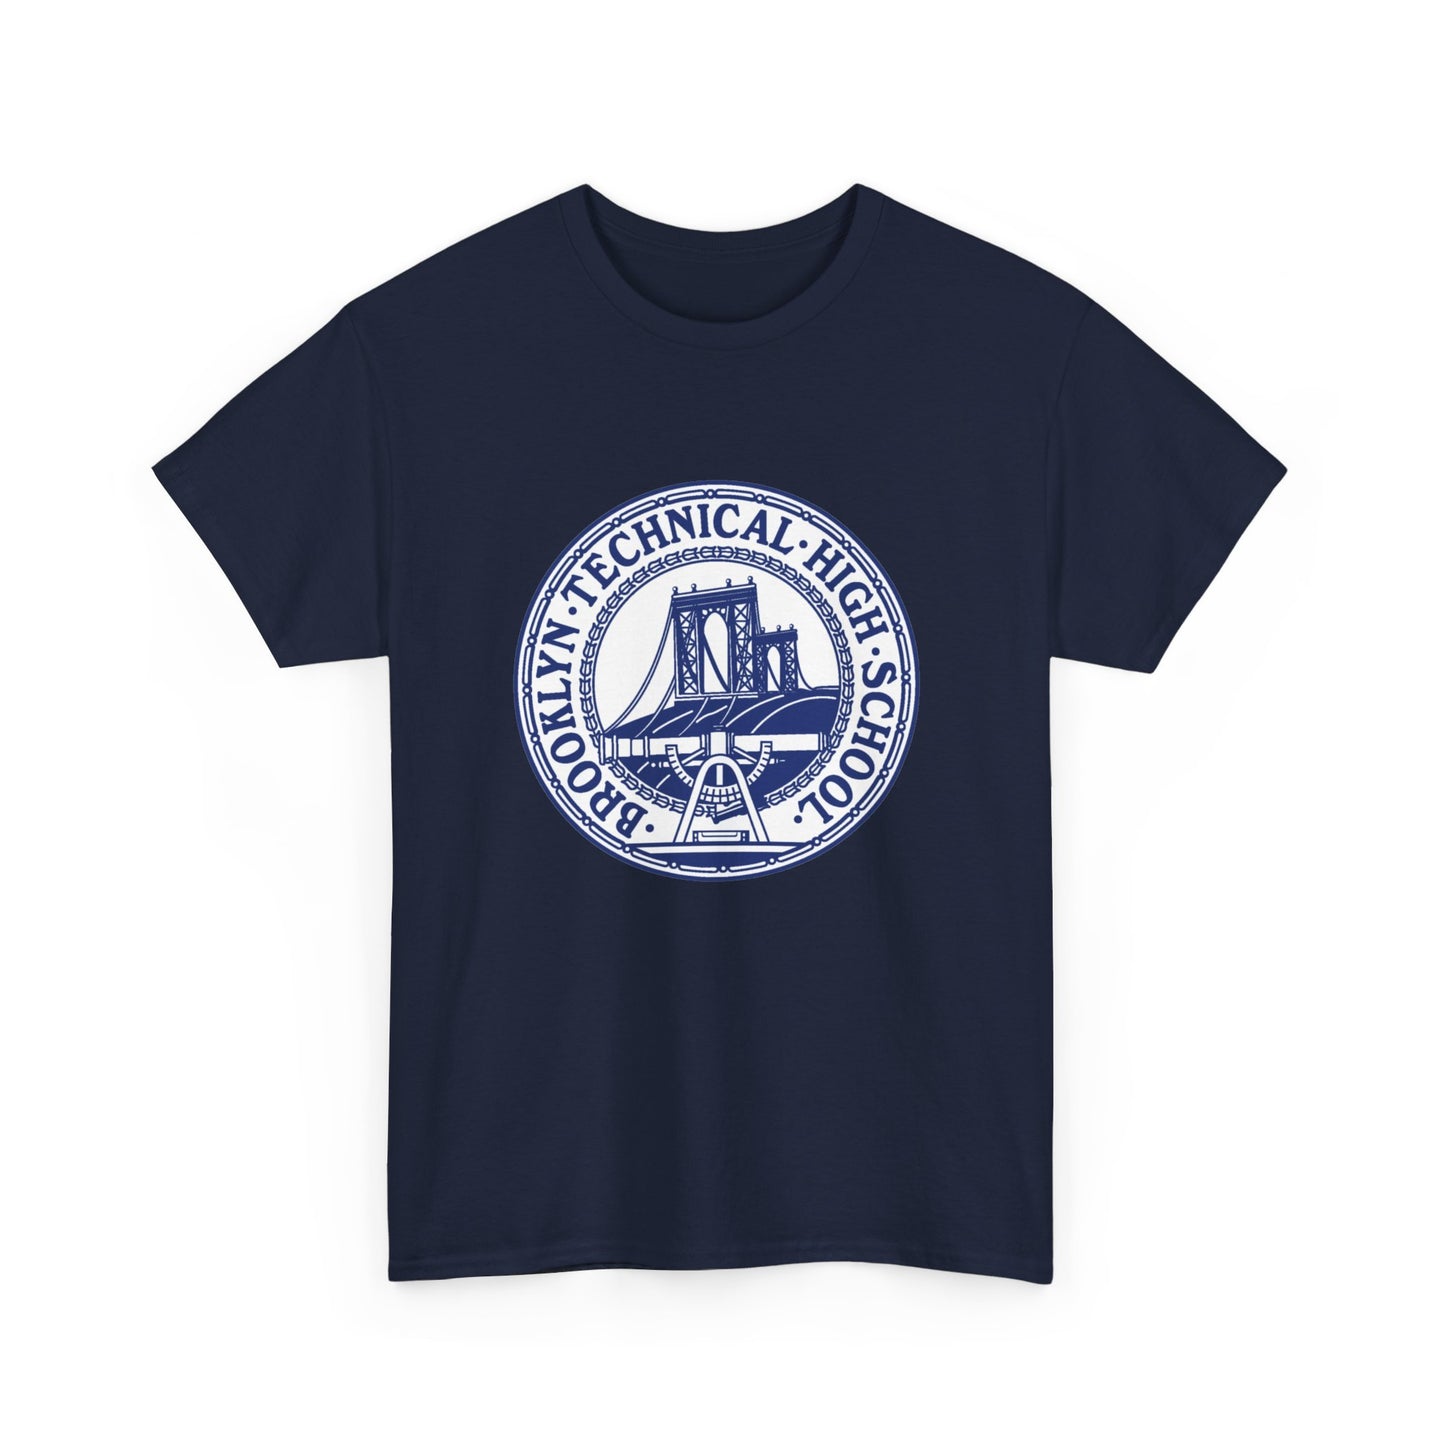 Classic Tech Seal With Background - Men's Heavy Cotton T-Shirt